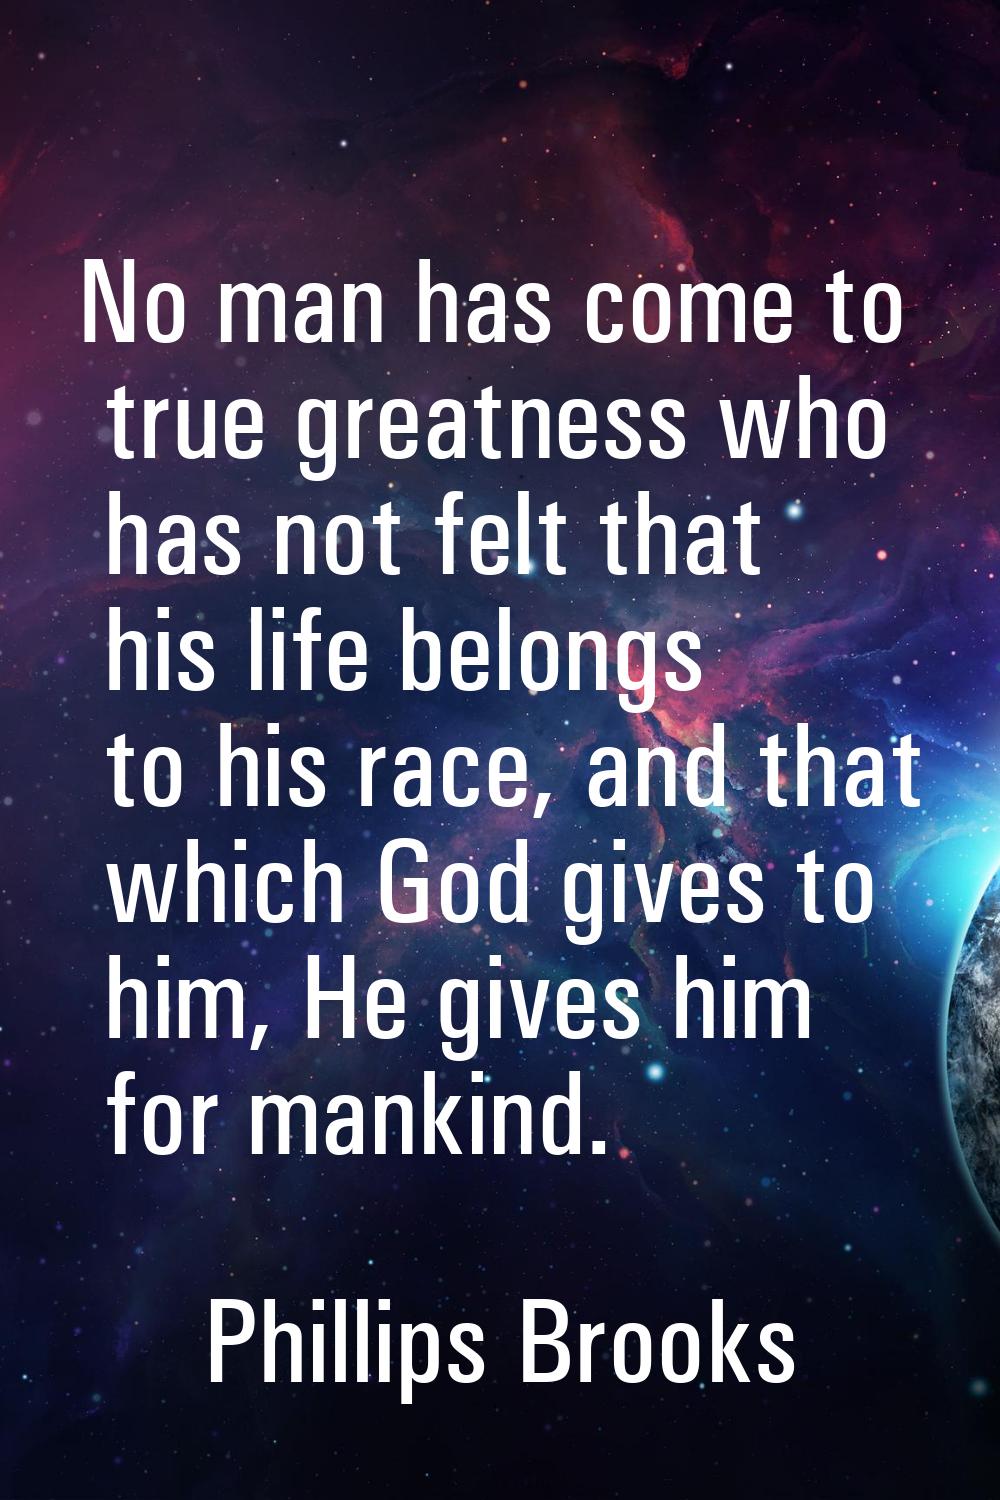 No man has come to true greatness who has not felt that his life belongs to his race, and that whic